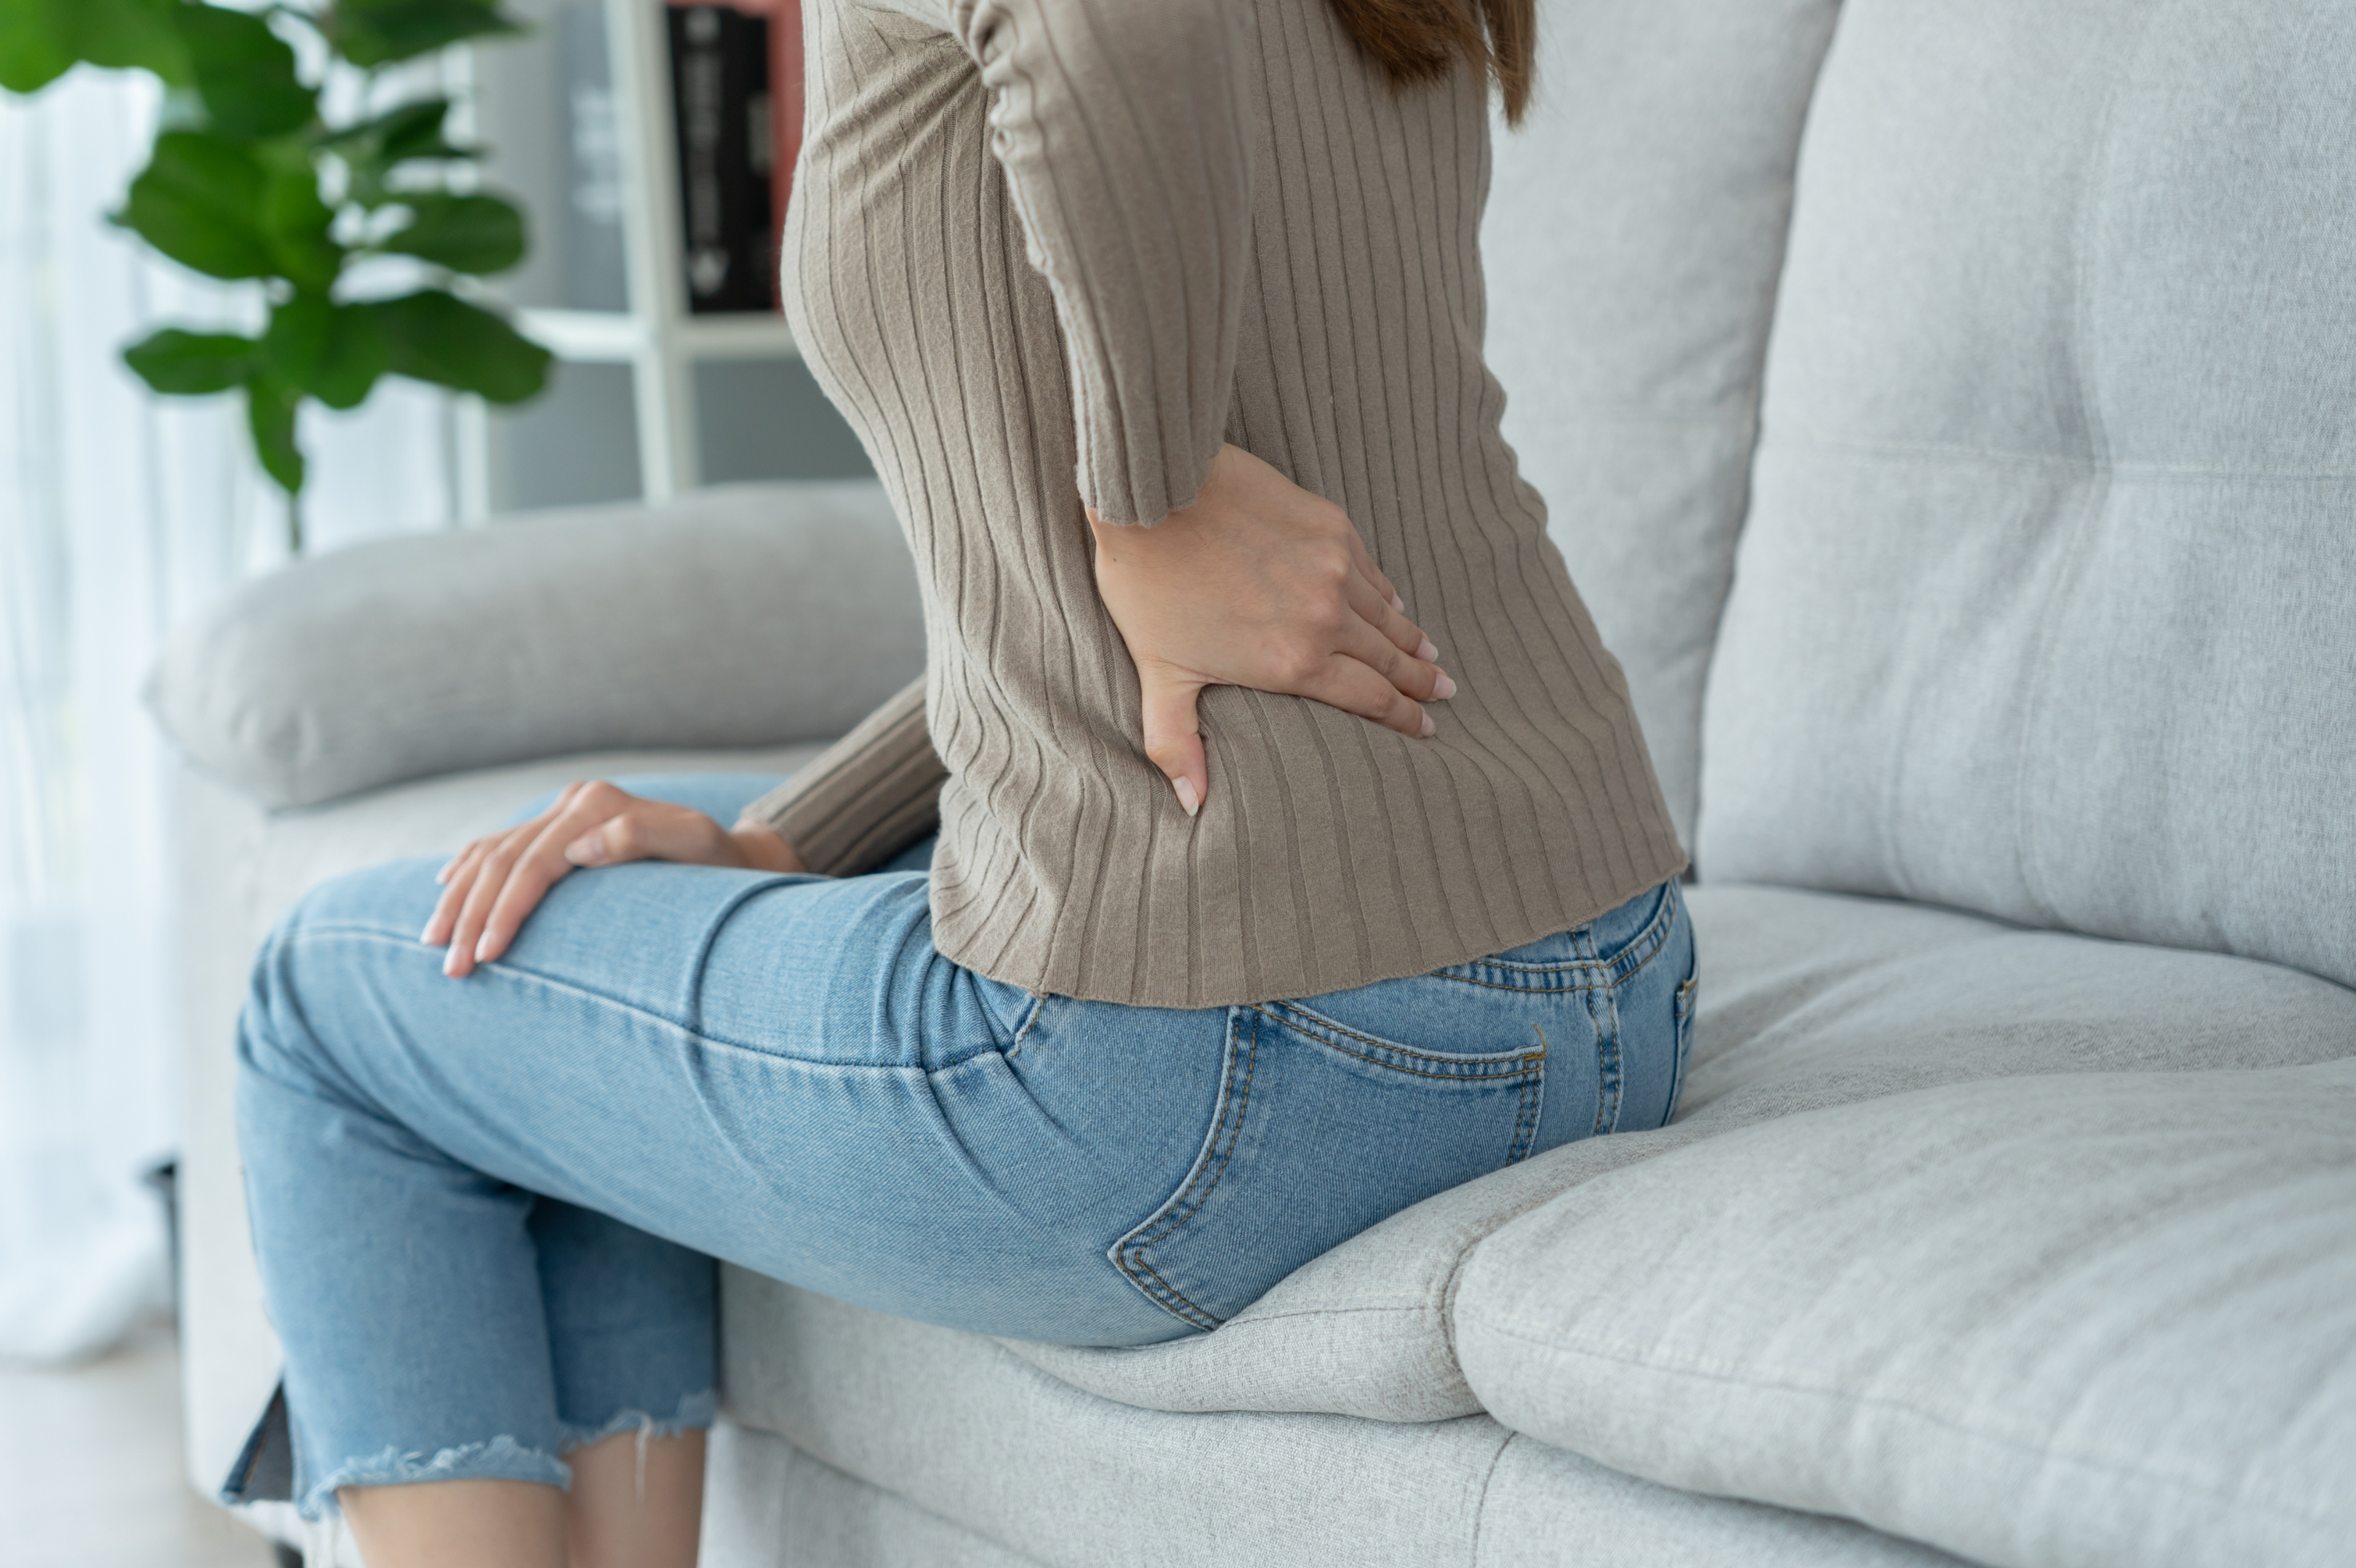 Sitting on surfaces that are too soft can often worsen back pain.